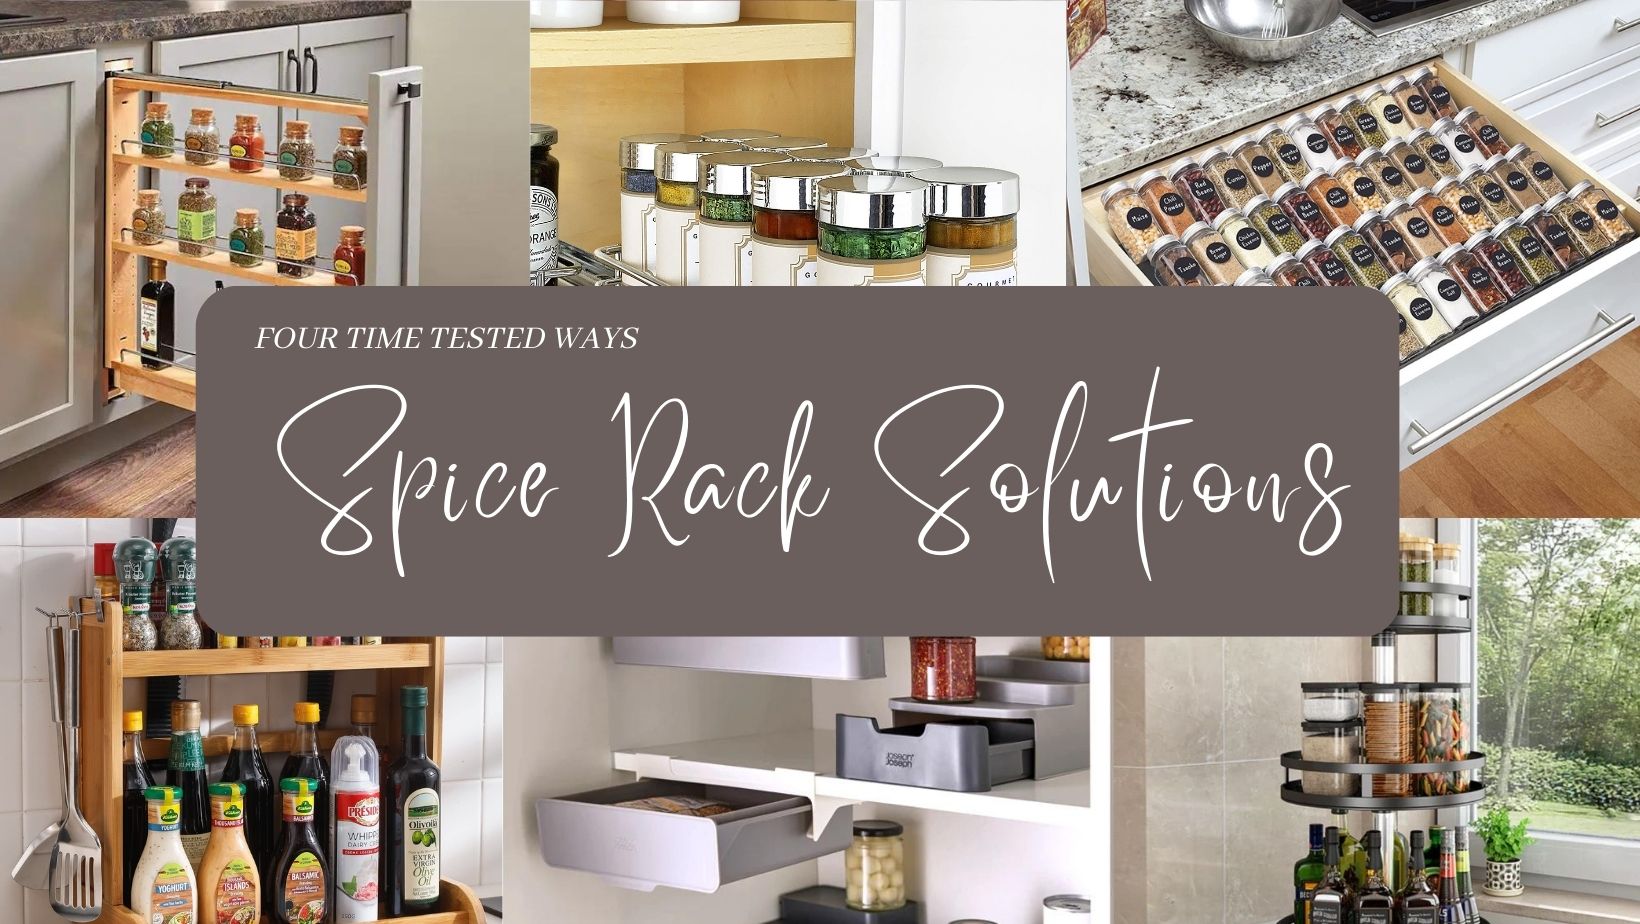 Super Effective and Simple Spice Storage Solutions (Four Ways)